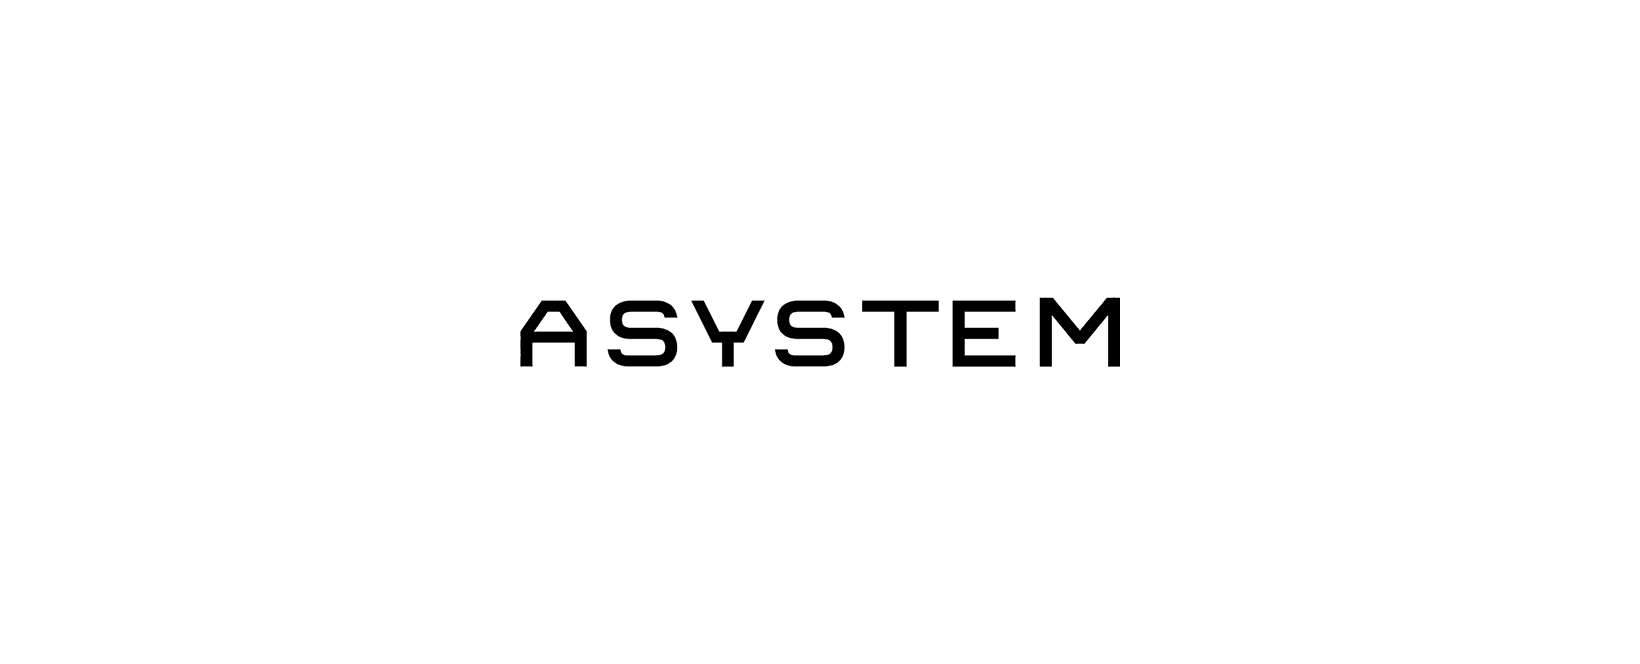 ASYSTEM Discount Code 2022